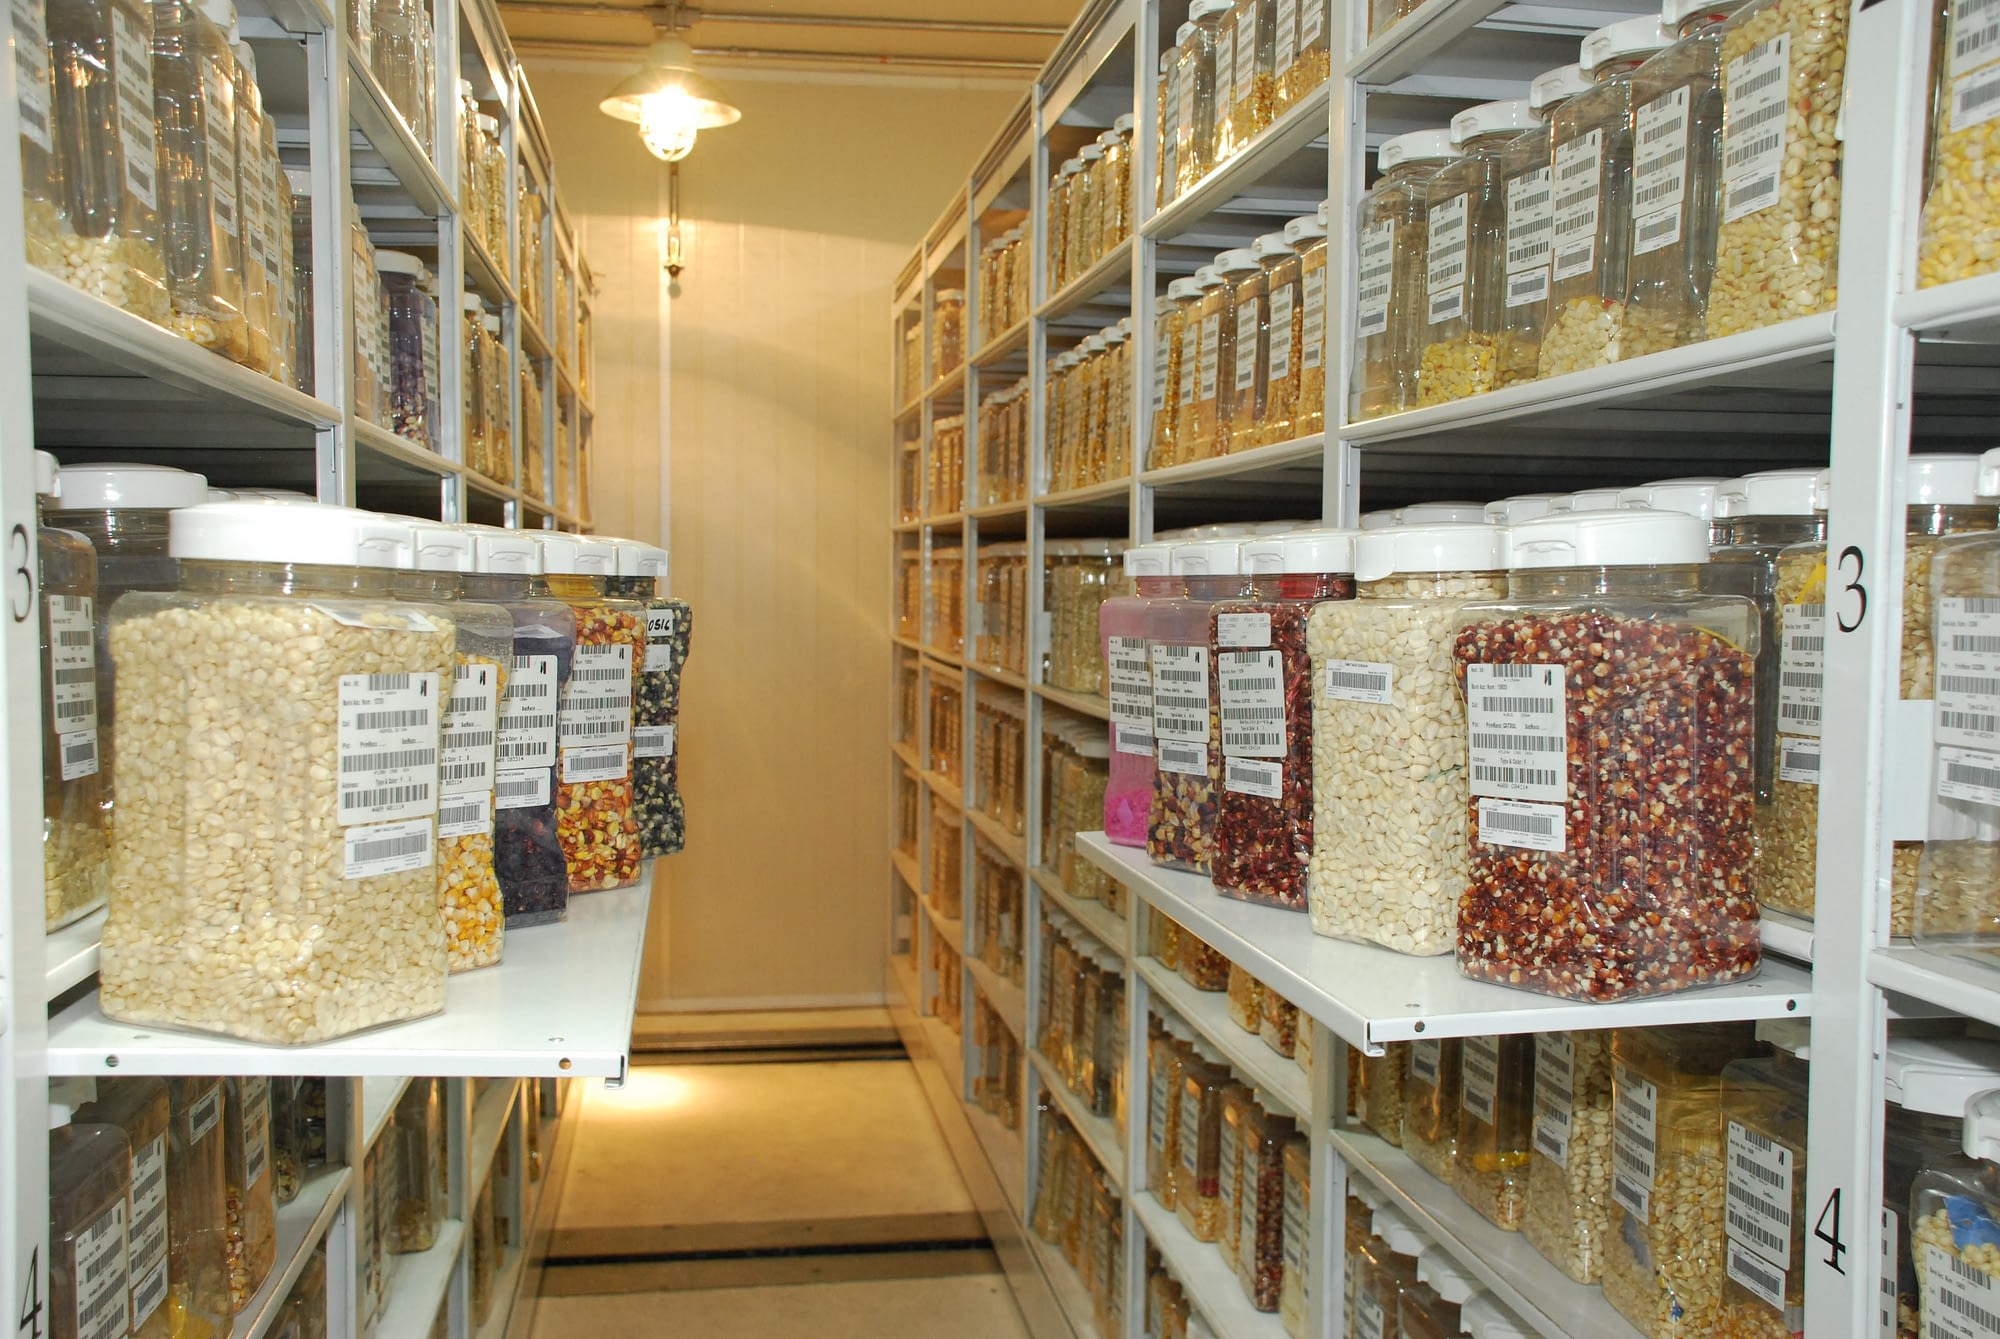 Some of the thousands of samples that make up the maize collection in the Wellhausen-Anderson Plant Genetic Resources Center at CIMMYT's global headquarters in Texcoco, Mexico. (Photo: Xochiquetzal Fonseca/CIMMYT)